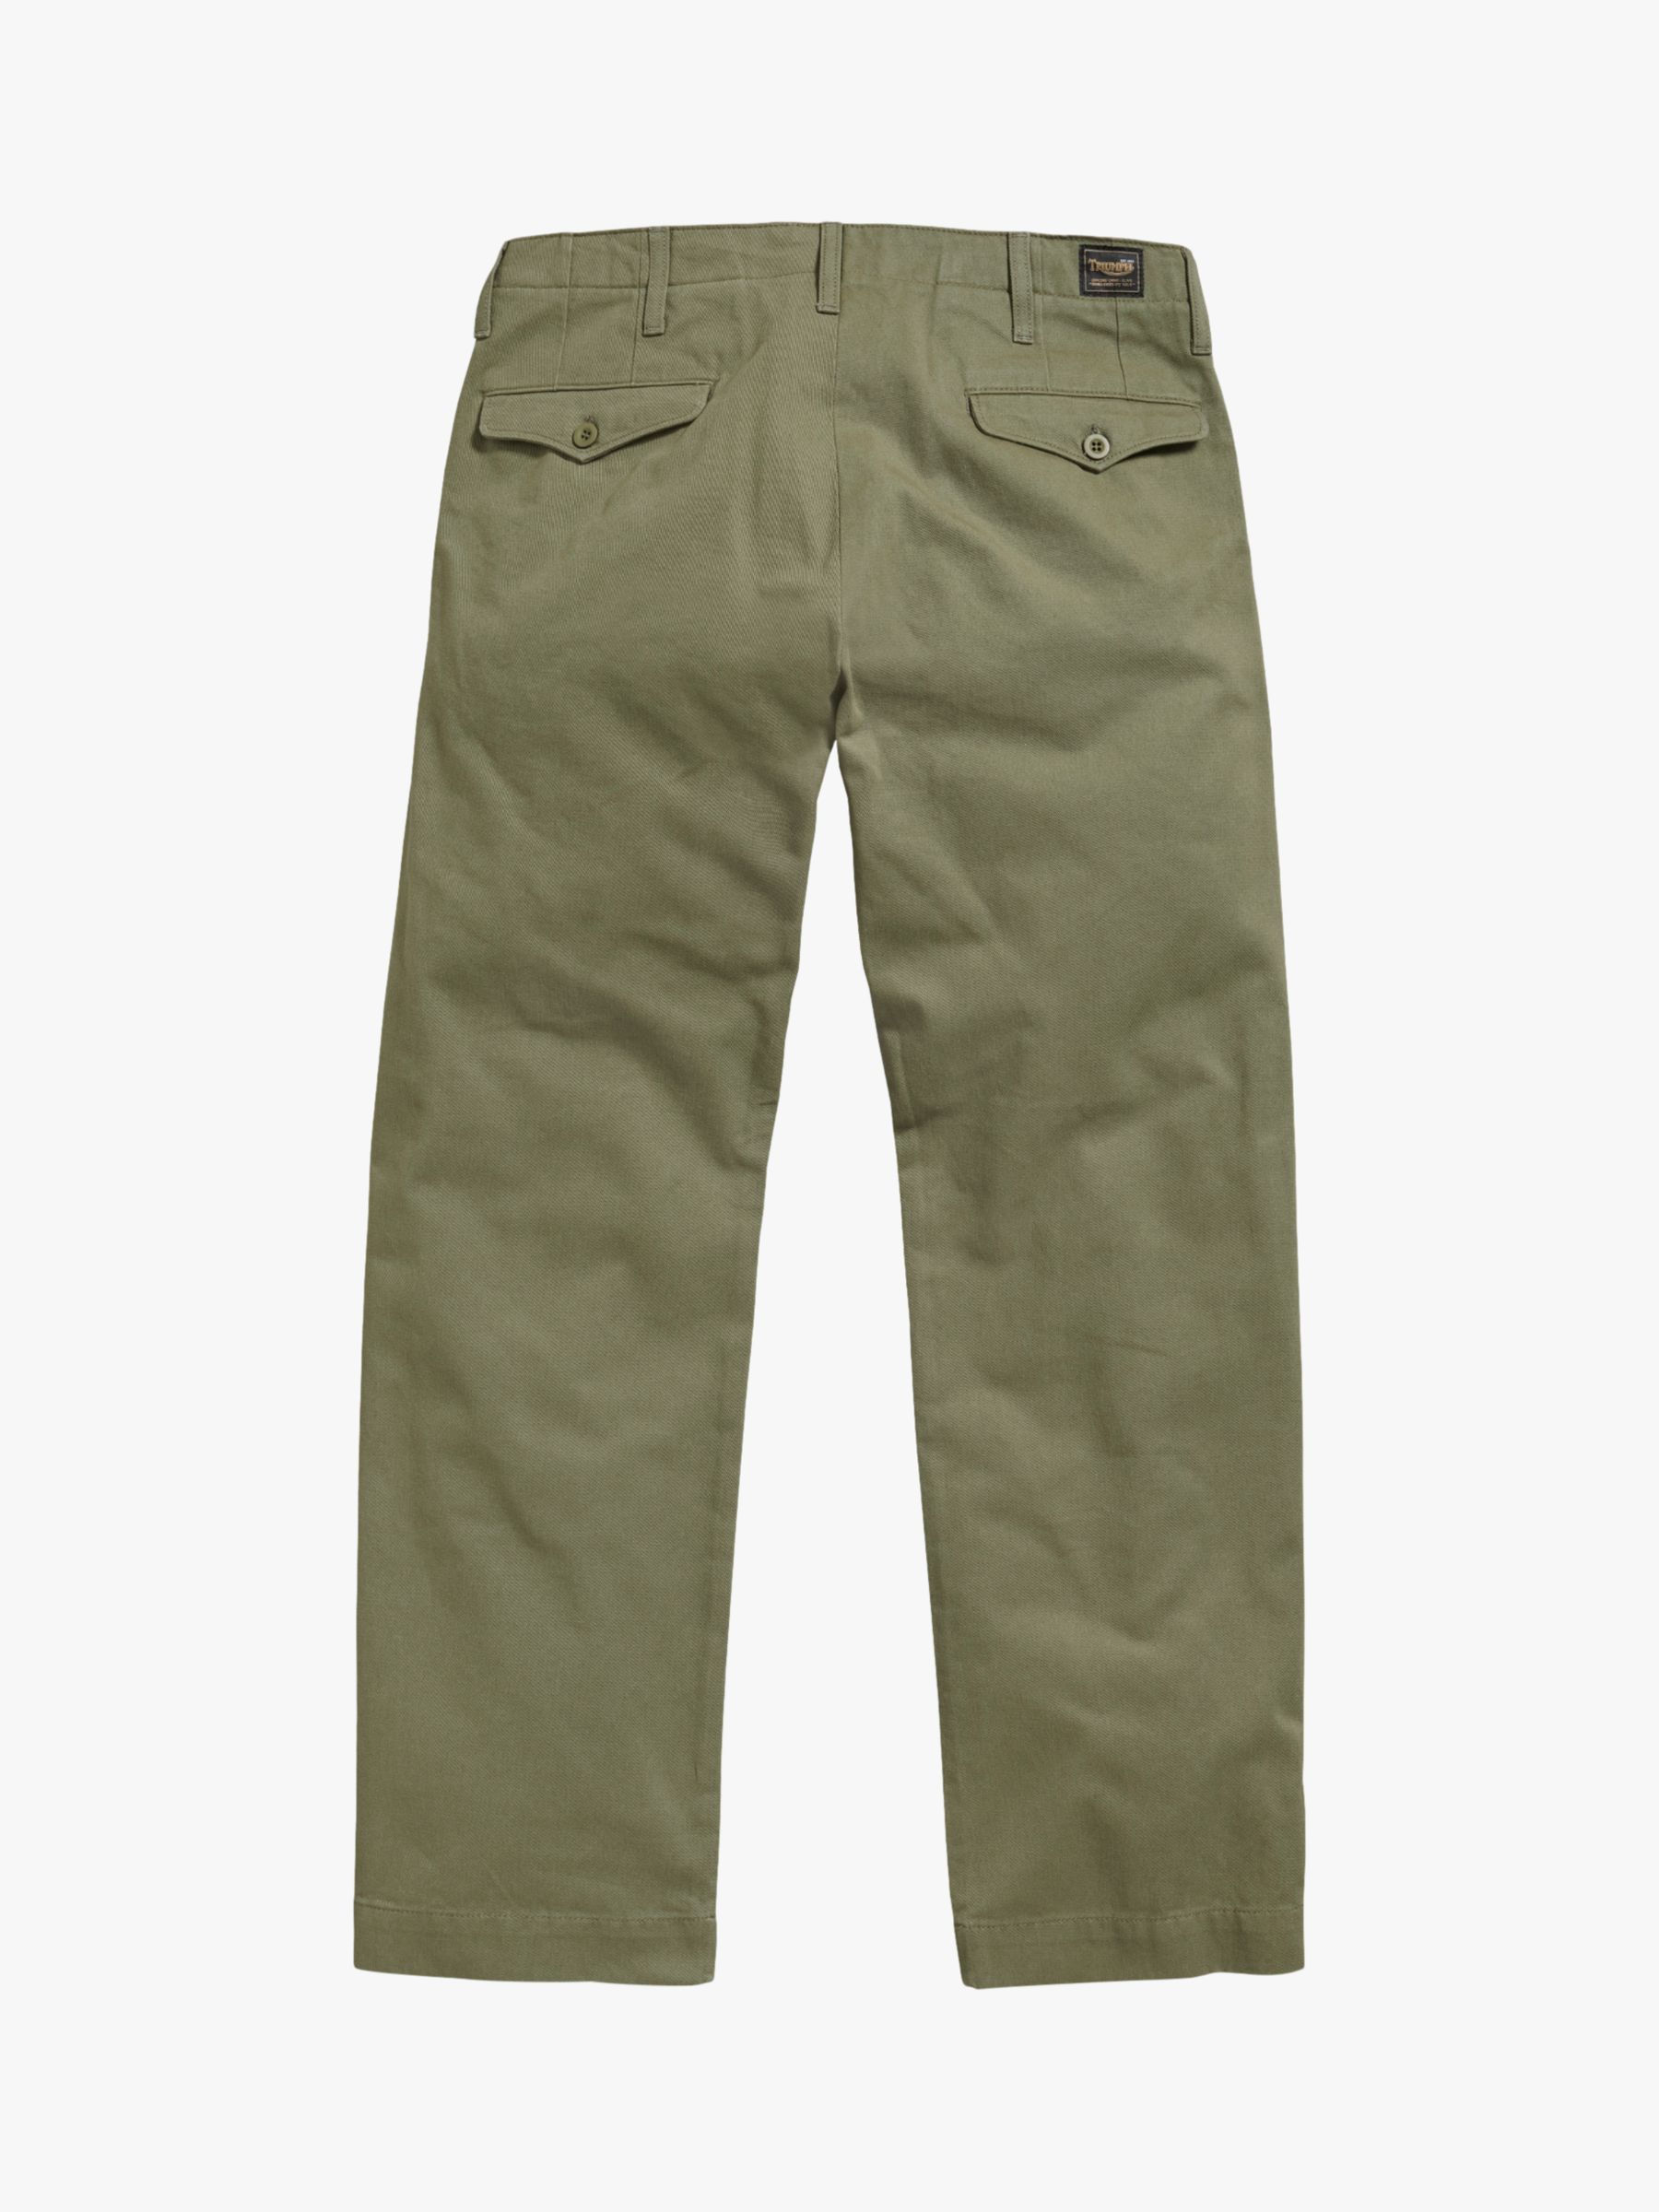 Triumph Motorcycles Officer Chinos, Olive, W38/L34